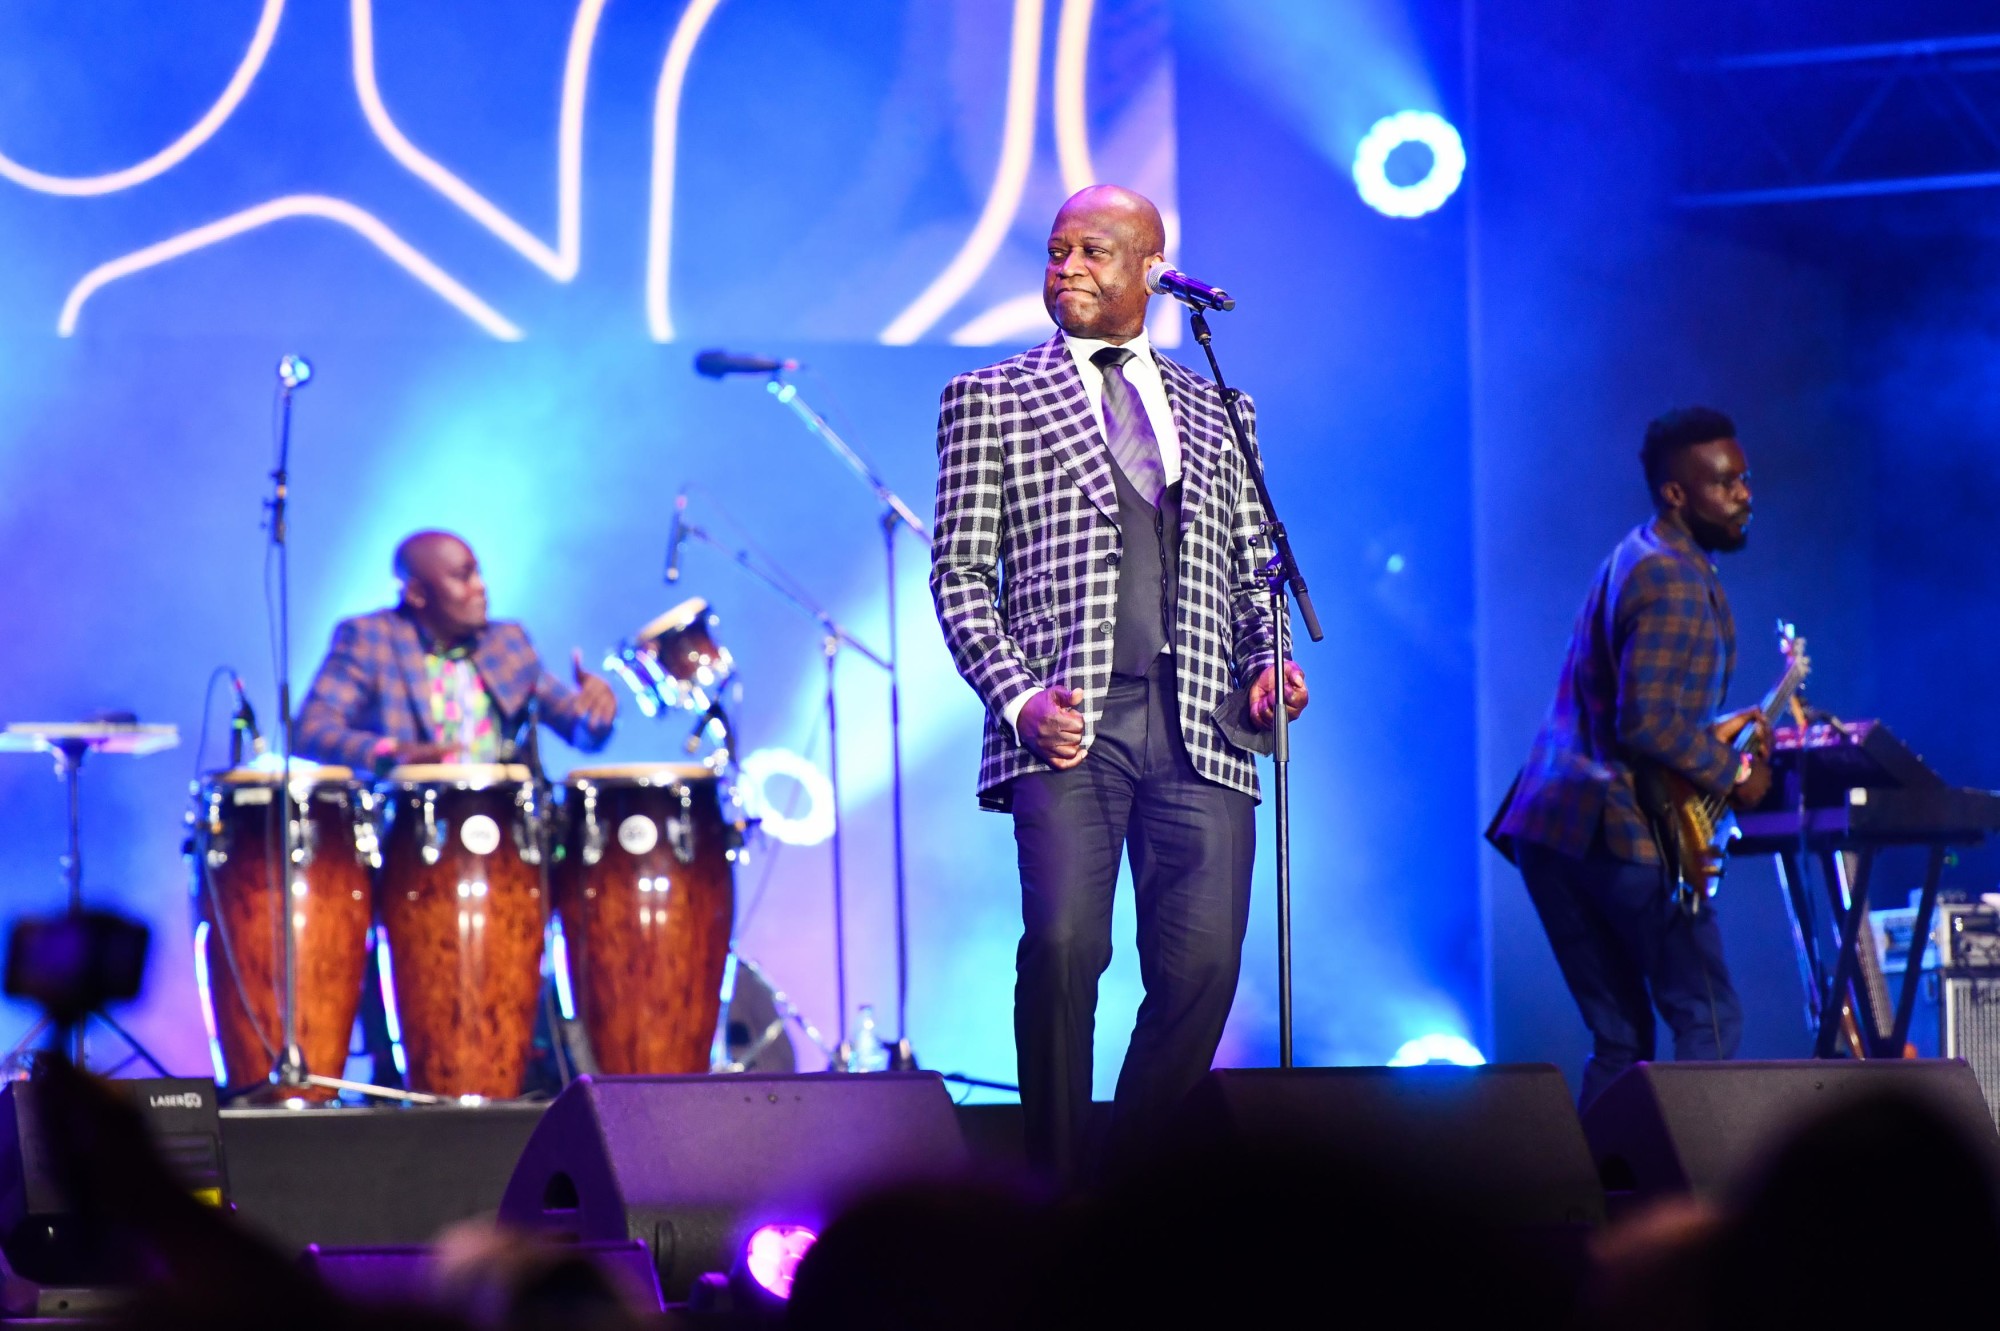 Zaiko performs during The Night of the Democratic Republic of Congo at Jubilee Stage m67570